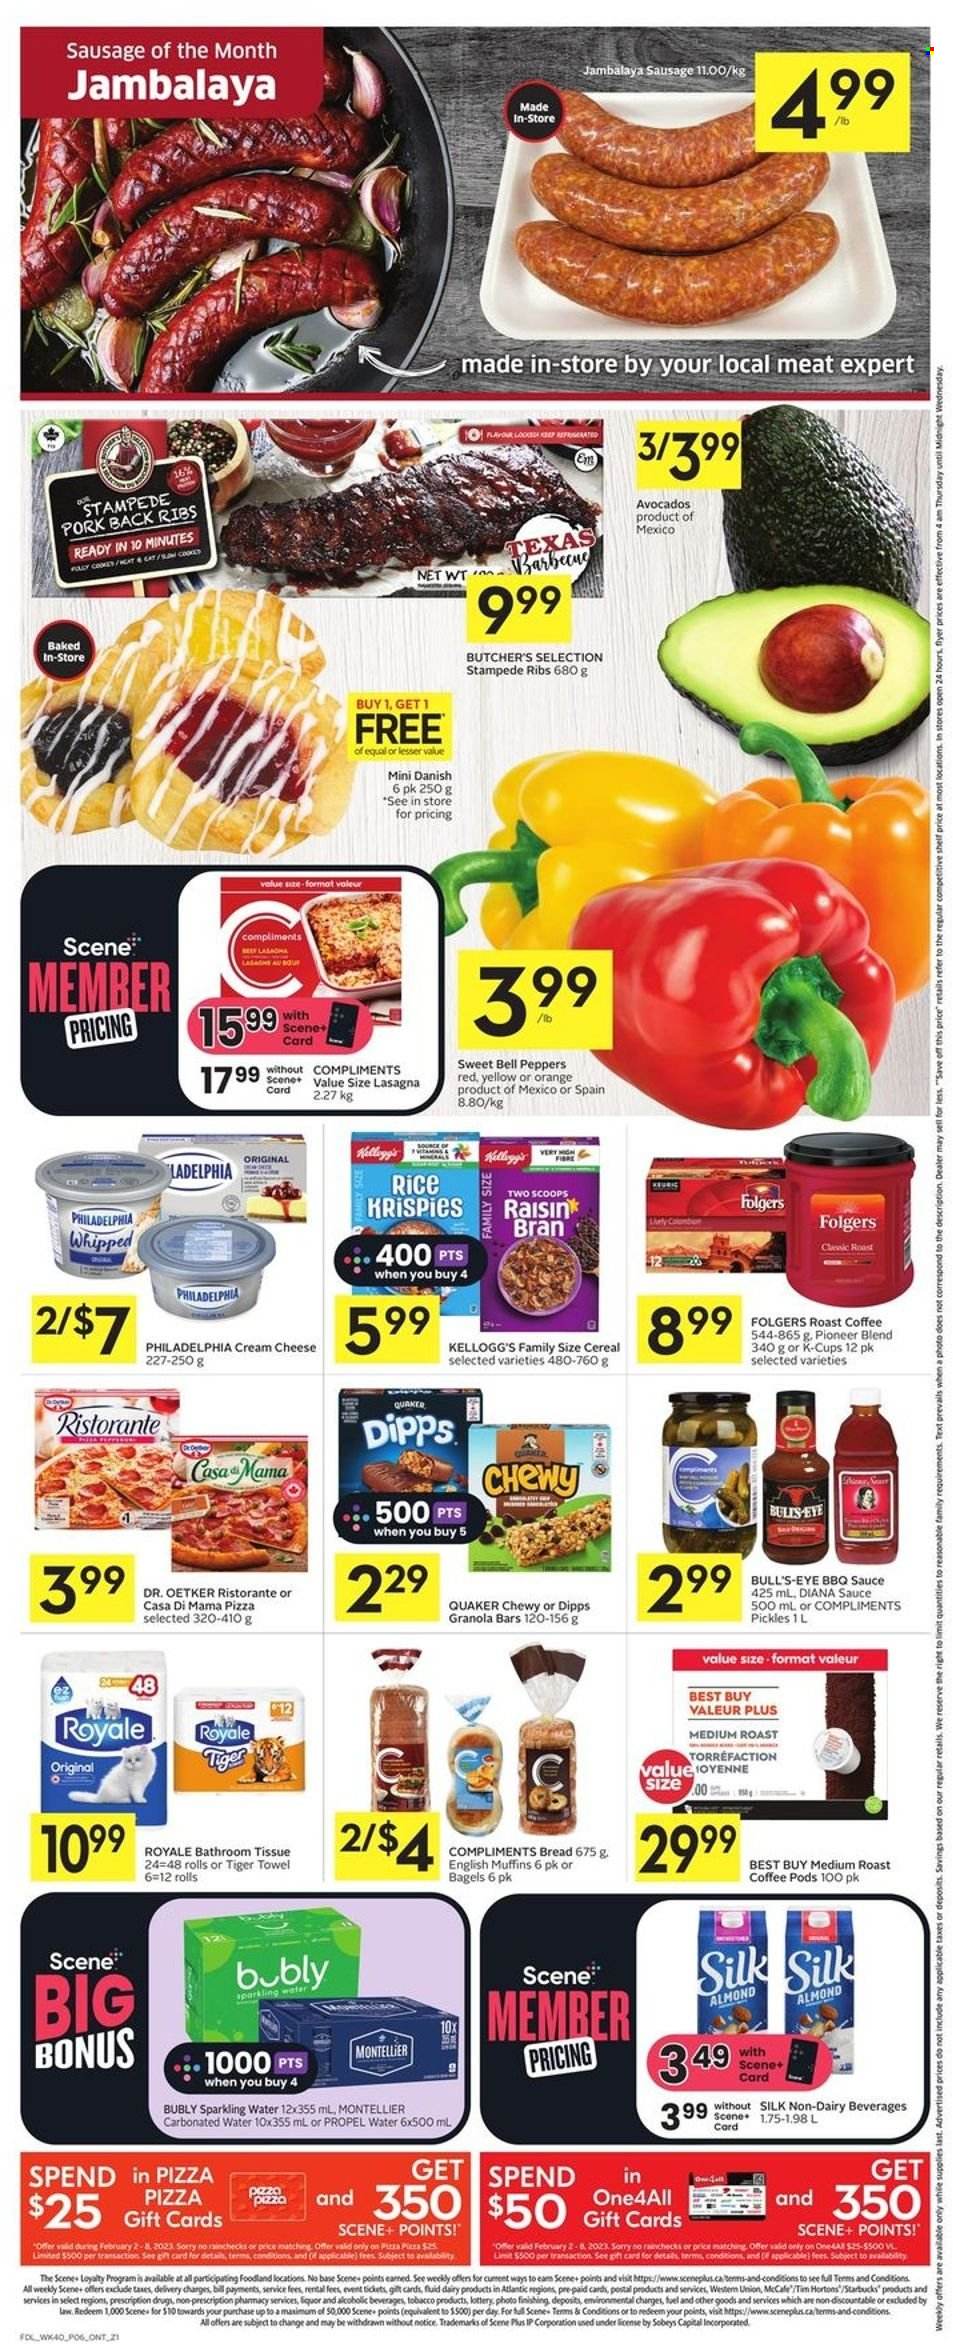 thumbnail - Foodland Flyer - February 02, 2023 - February 08, 2023 - Sales products - bagels, bread, english muffins, bell peppers, peppers, avocado, oranges, sauce, Quaker, lasagna meal, sausage, Dr. Oetker, Kellogg's, pickles, cereals, granola bar, Rice Krispies, Raisin Bran, BBQ sauce, sparkling water, coffee, coffee pods, Folgers, coffee capsules, McCafe, K-Cups, liquor, ribs, pork meat, pork ribs, pork back ribs, bath tissue, Philadelphia. Page 2.